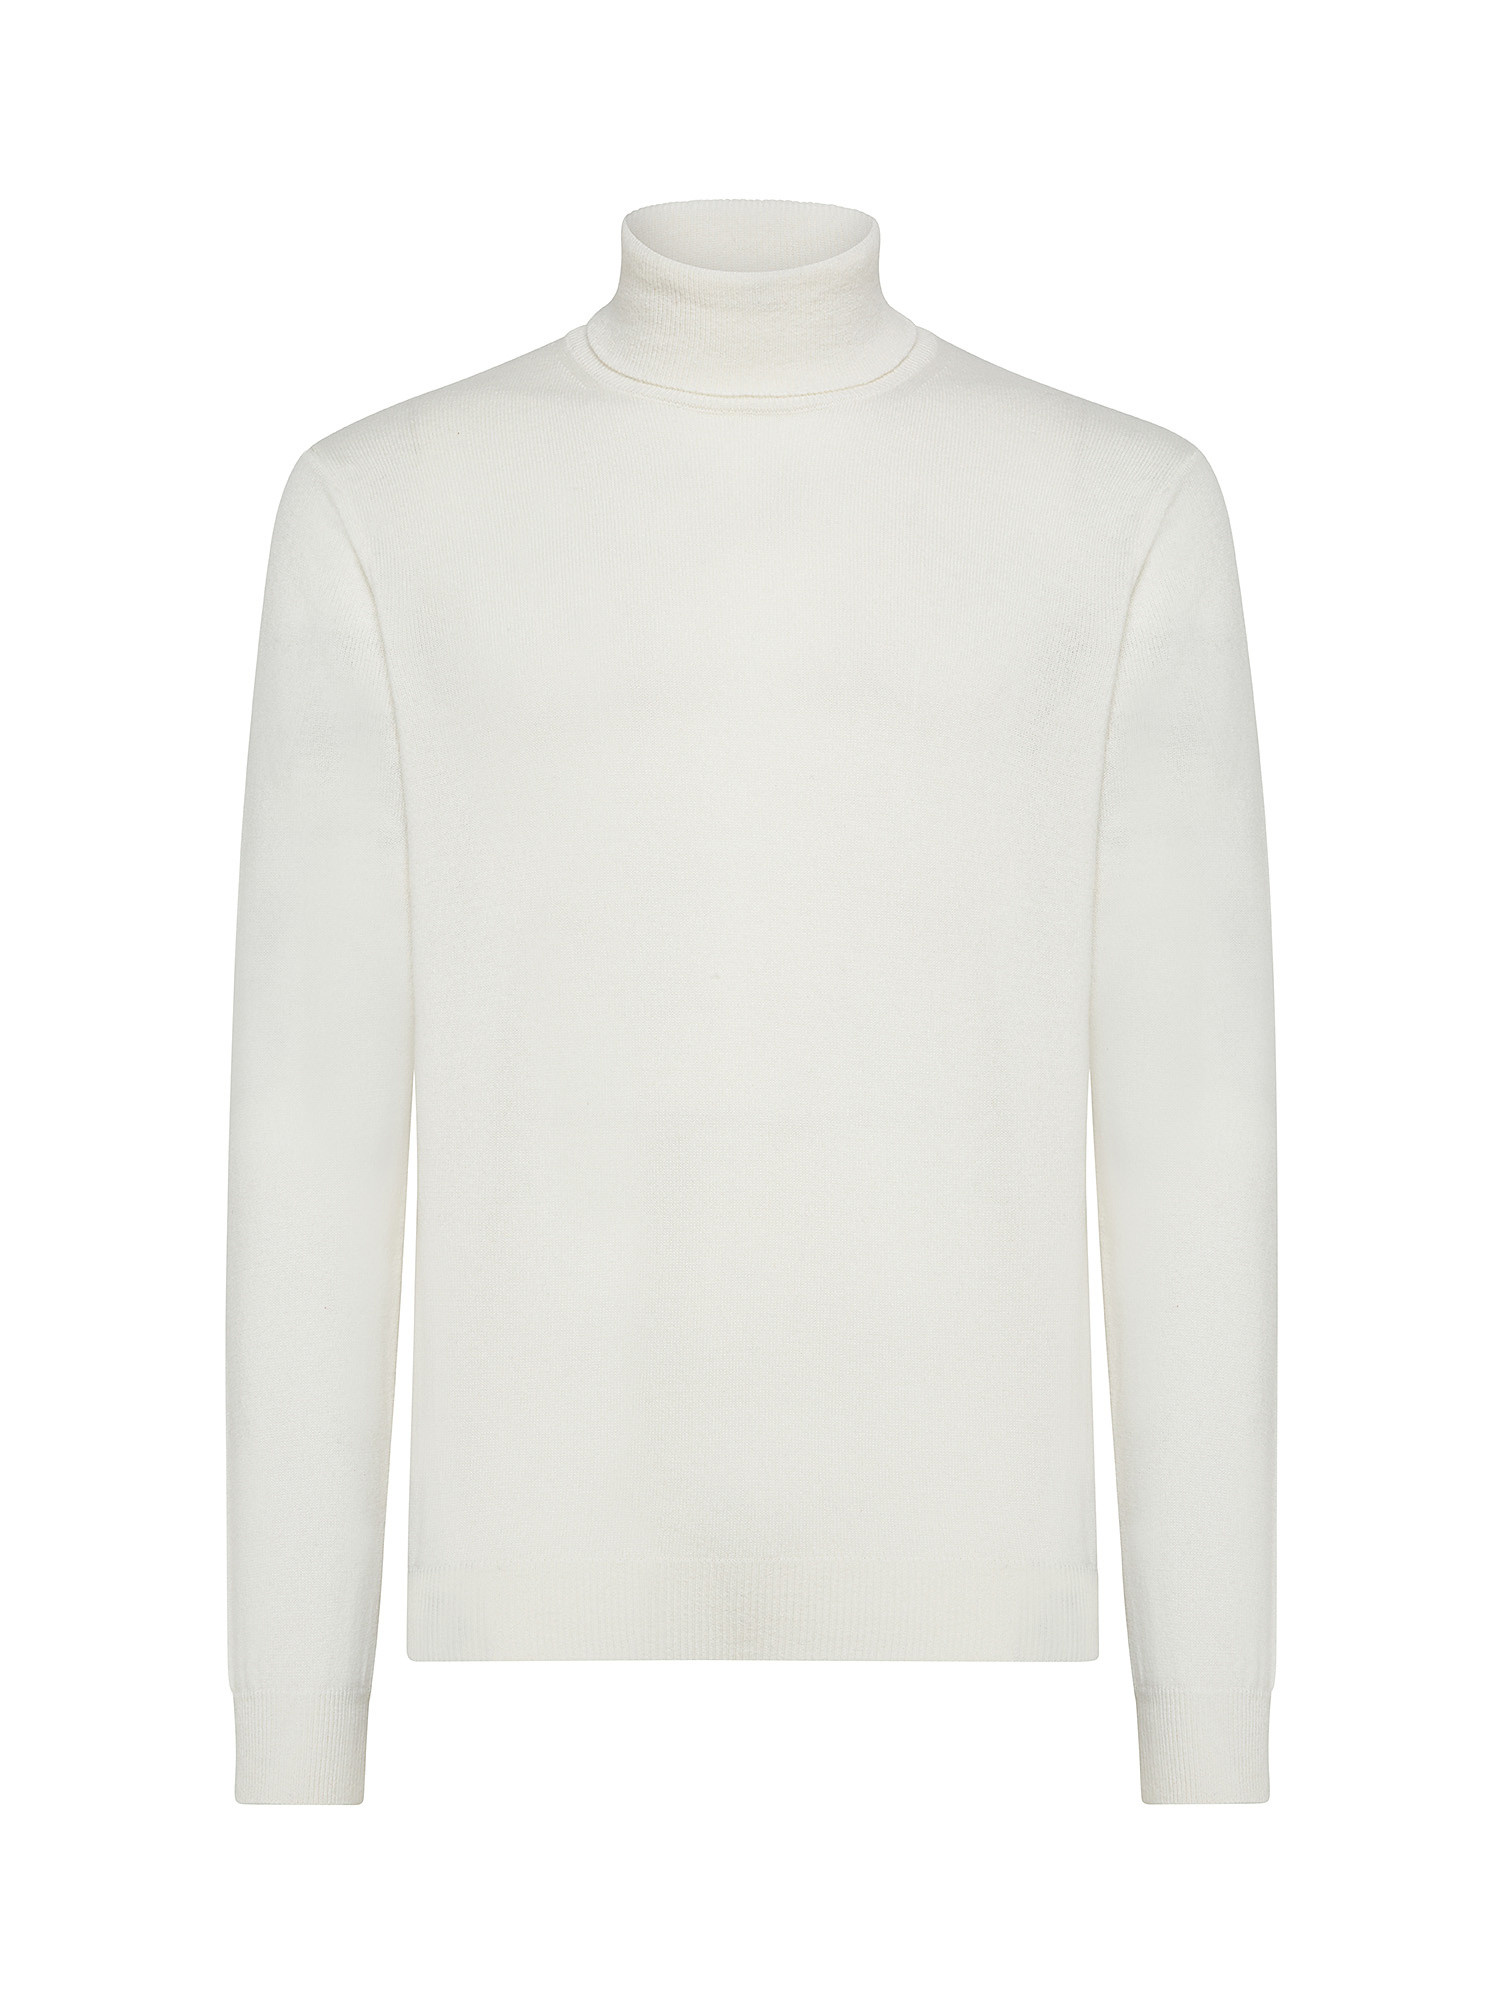 Coin Cashmere - Dolcevita in puro cashmere, Bianco, large image number 0